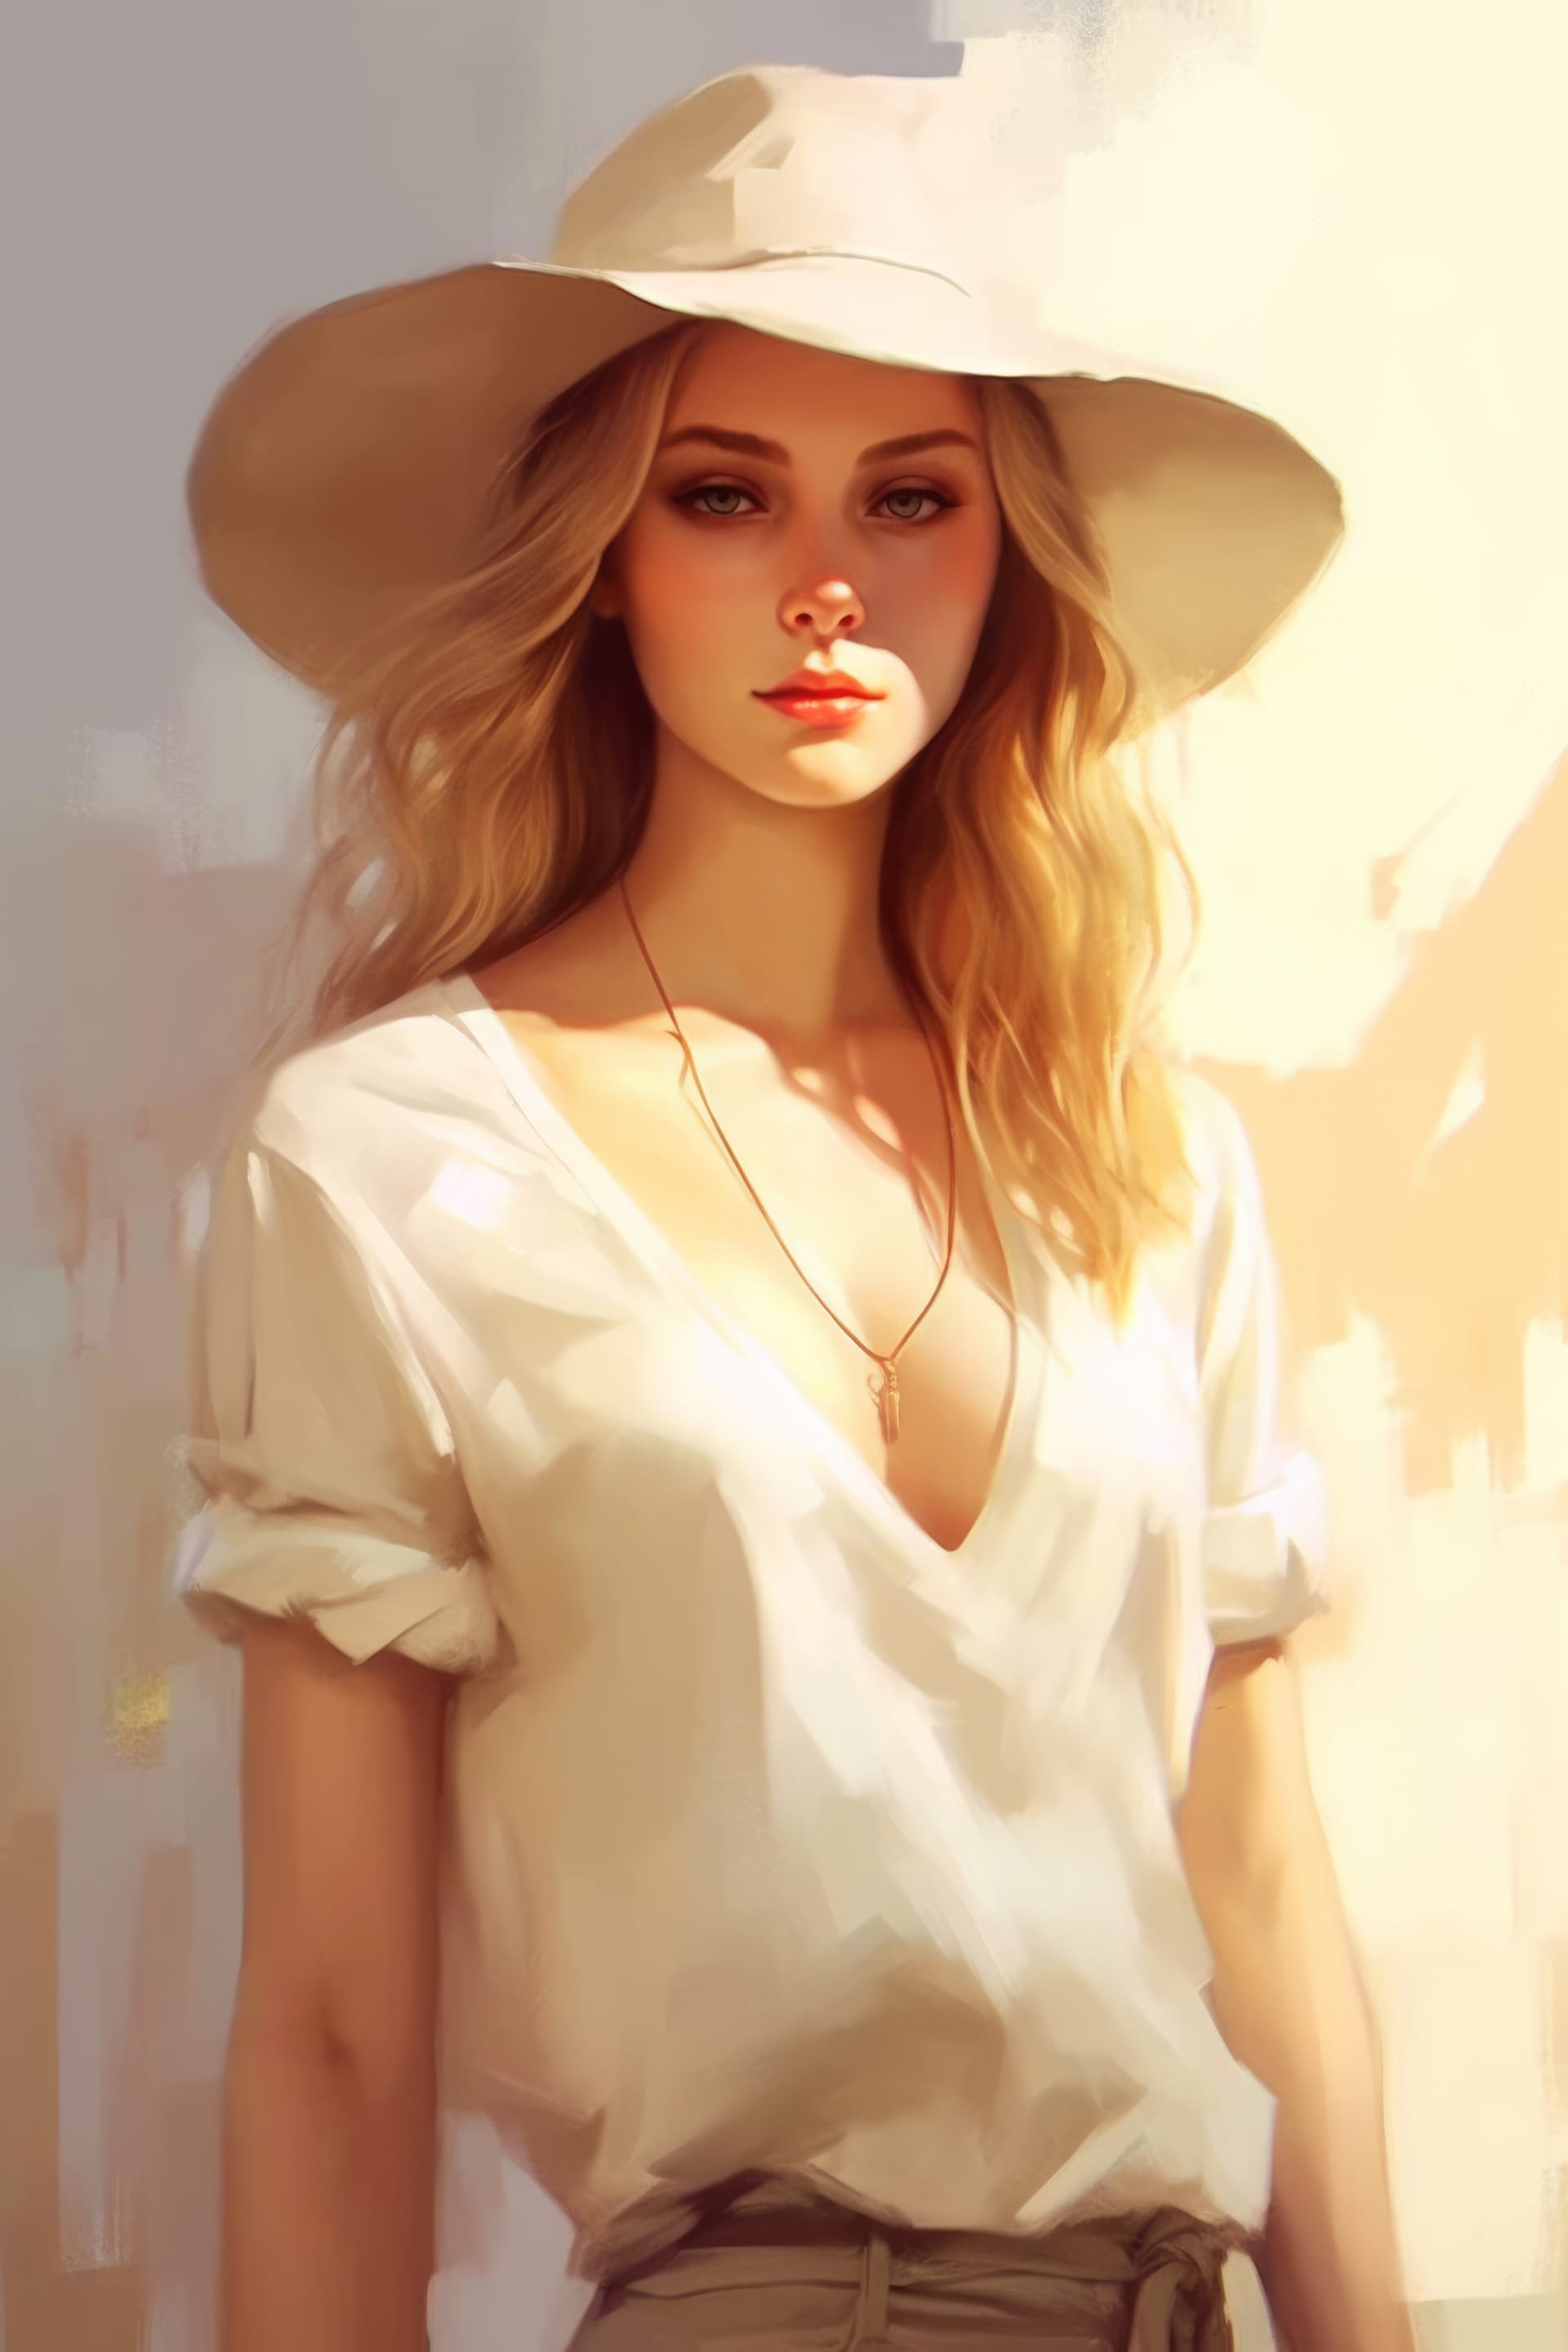 Free profile picture girl nice white hat